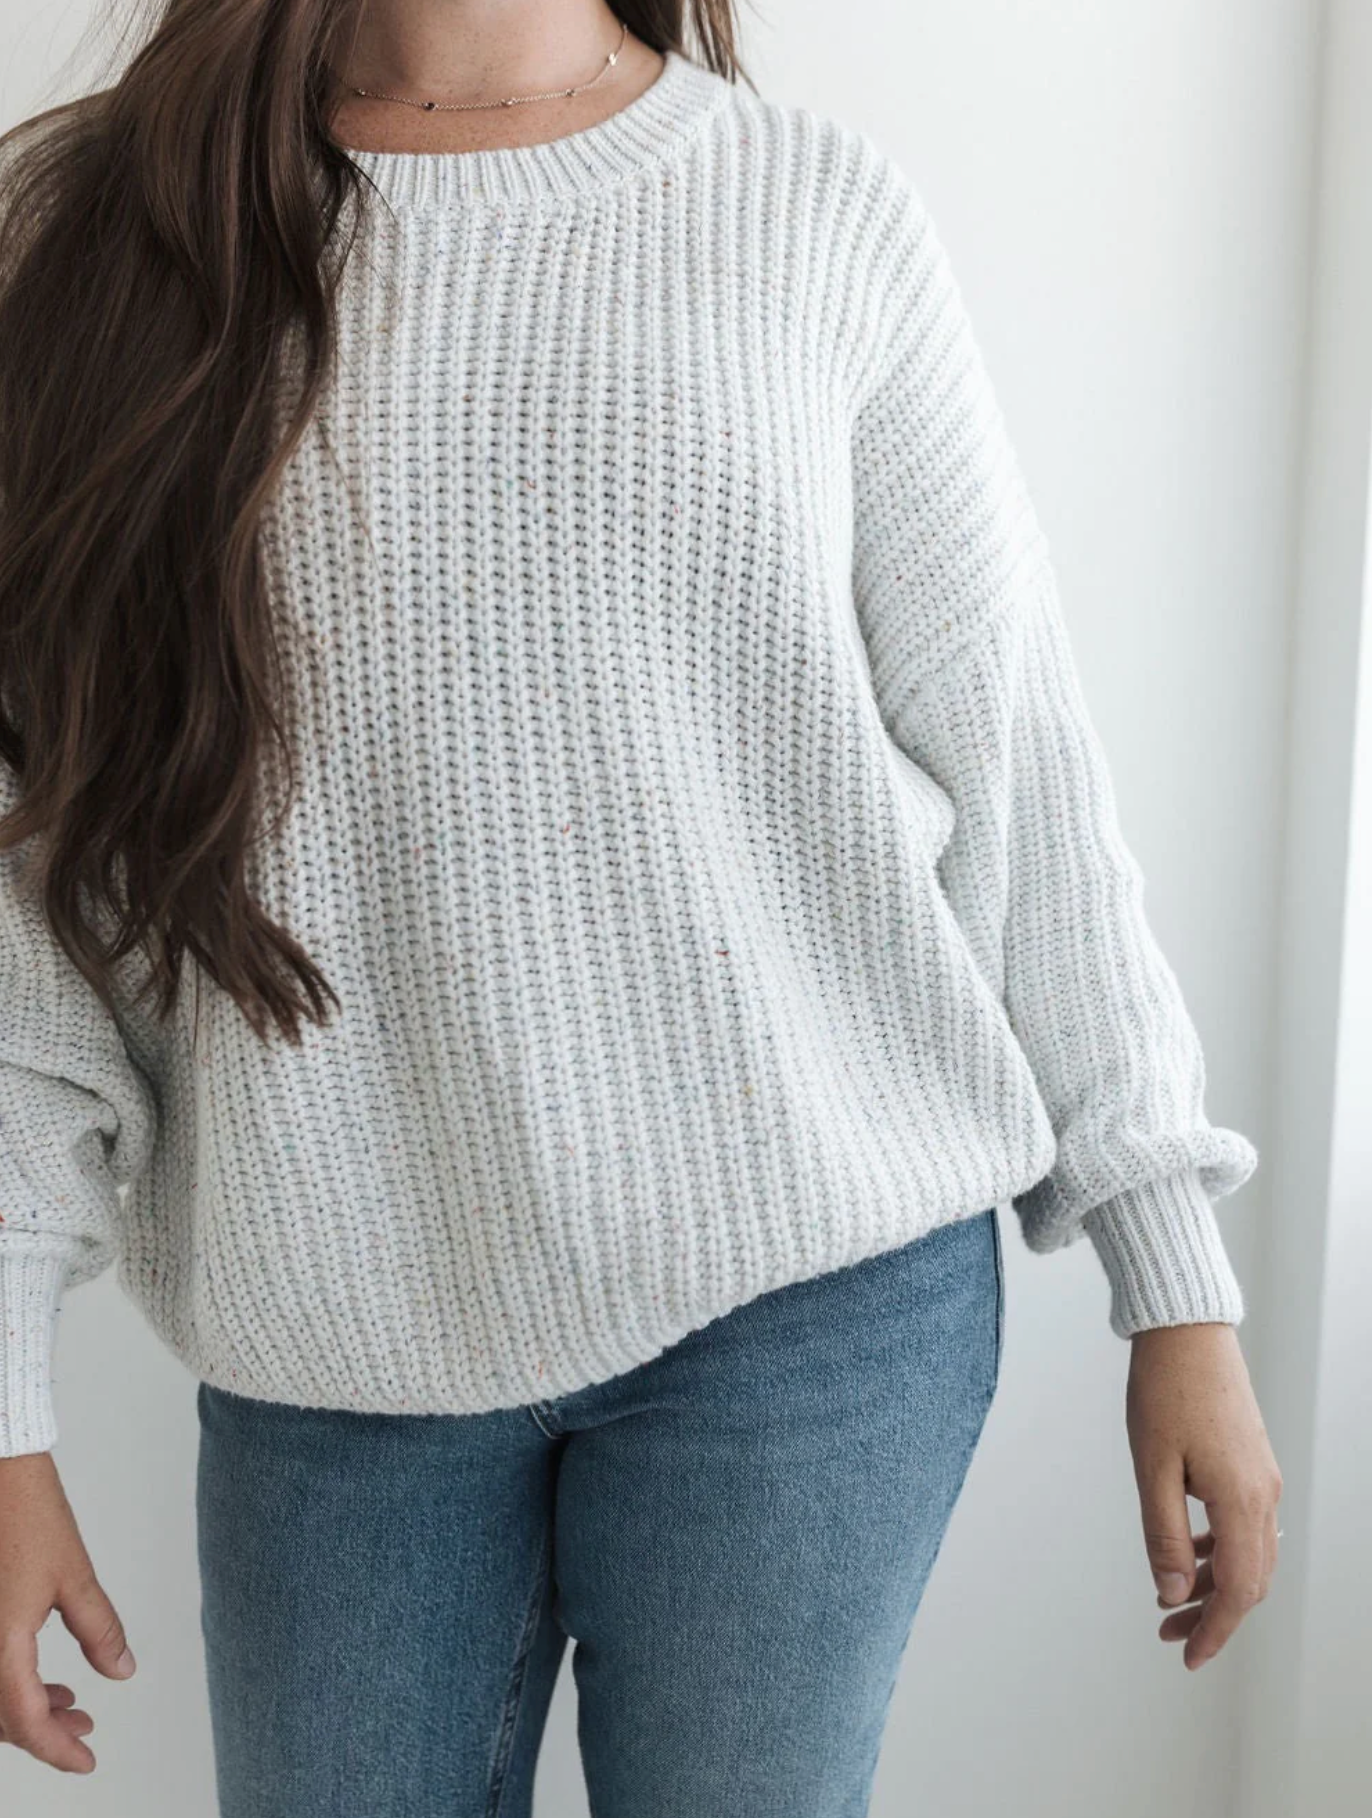 Adult Chunky Knit Sweater - Frosted Sprinkles